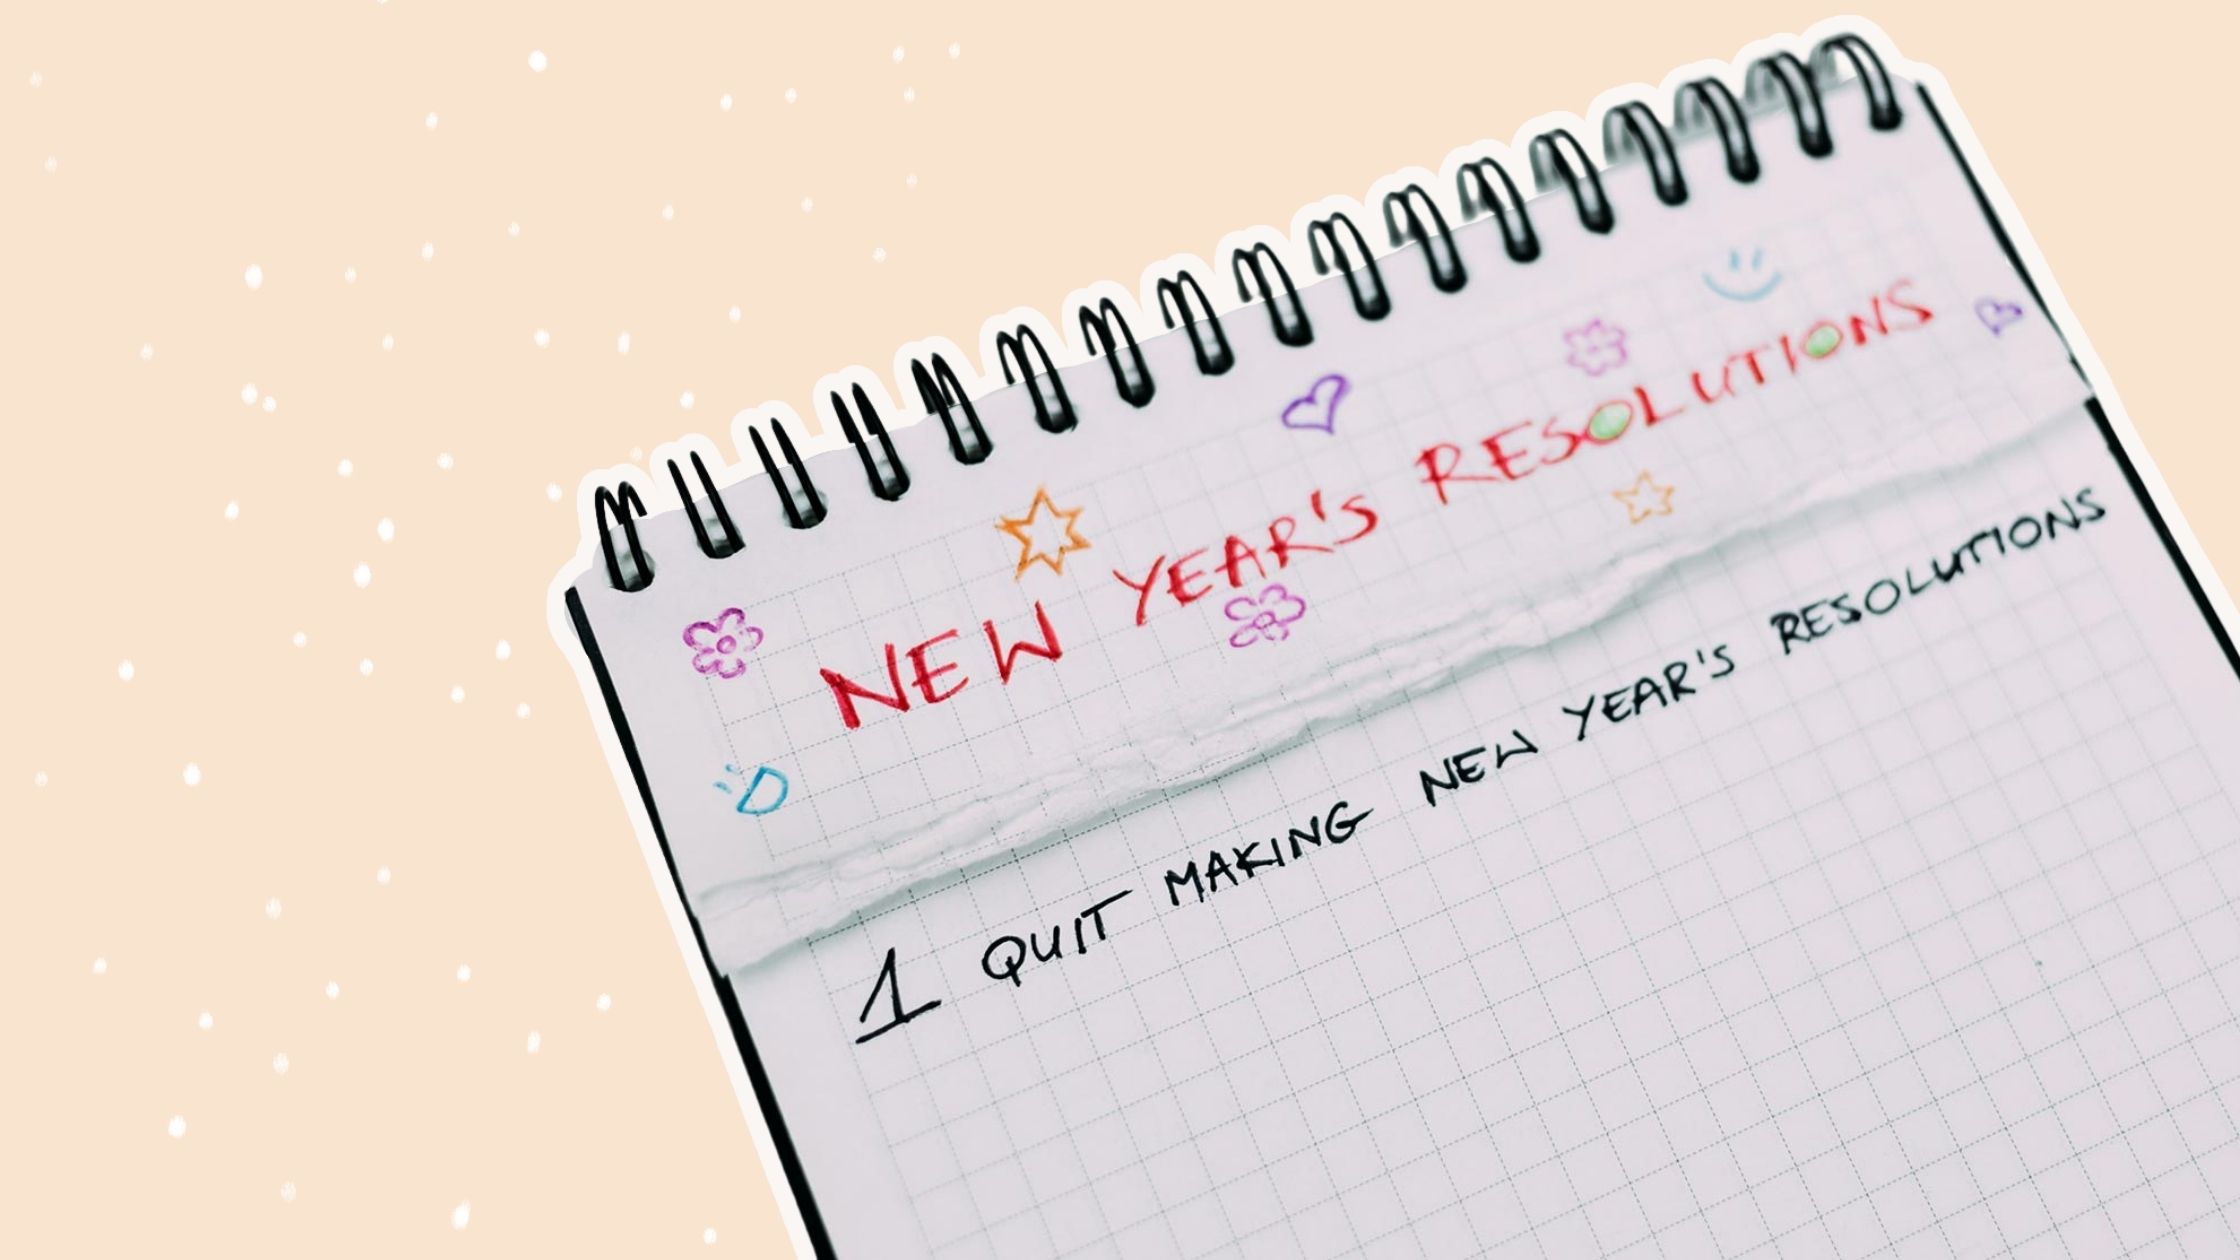 Ditch the diet new year’s resolutions and do this instead. Image: Unsplash